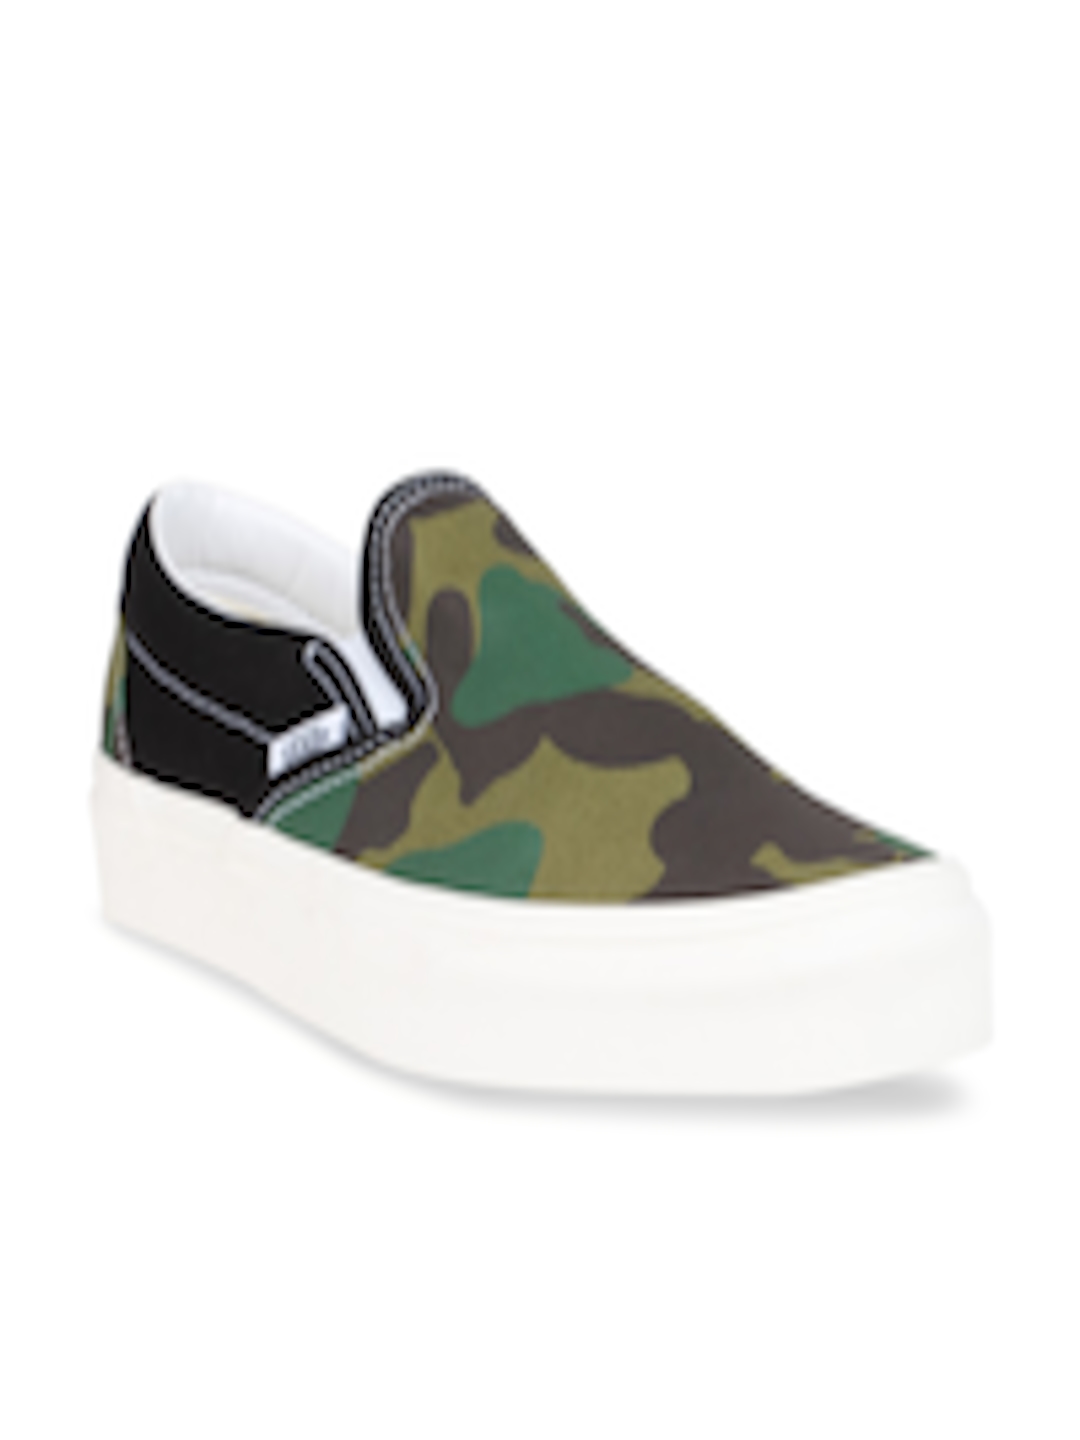 Buy Vans Unisex Olive Green Camouflage Slip On Sneakers - Casual Shoes ...